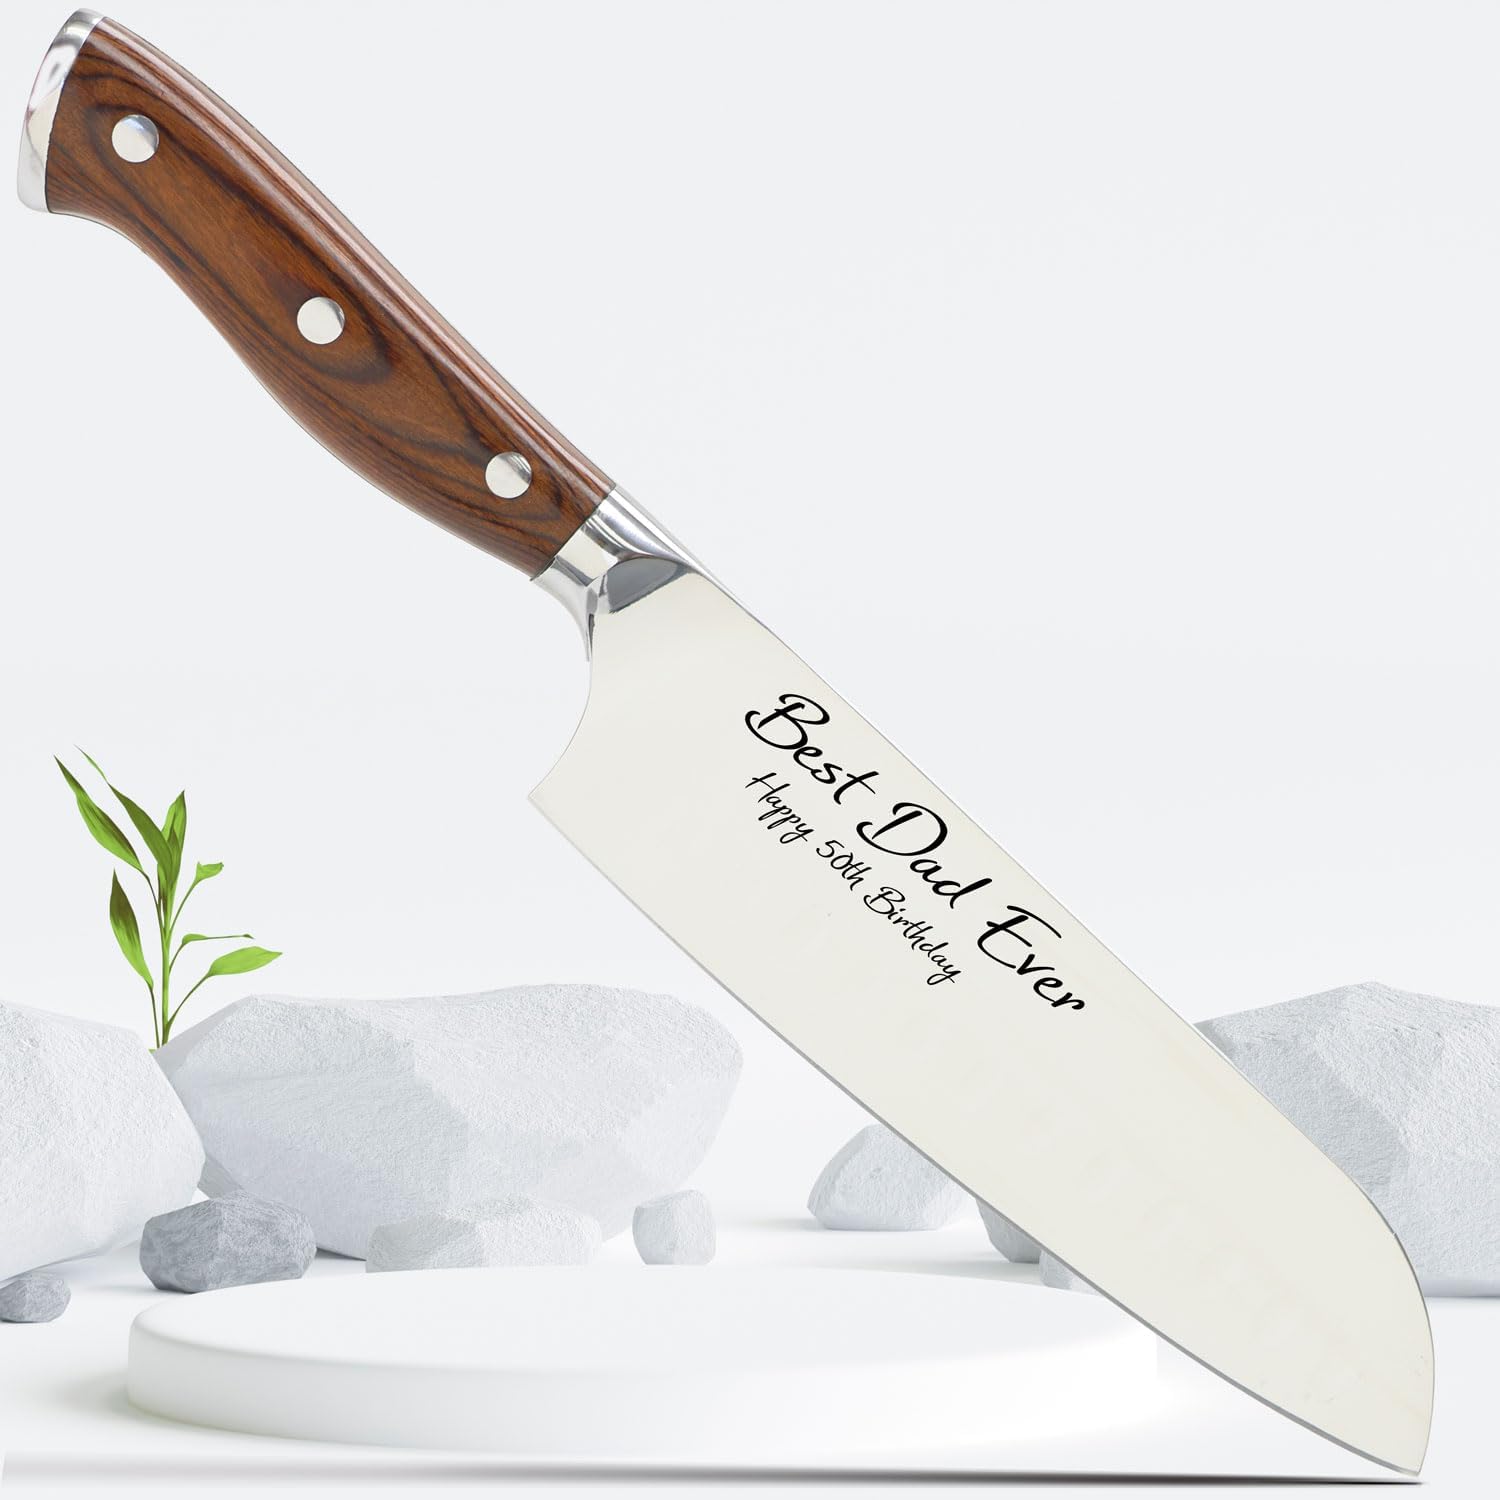 Professional Japanese Knife with Personalization